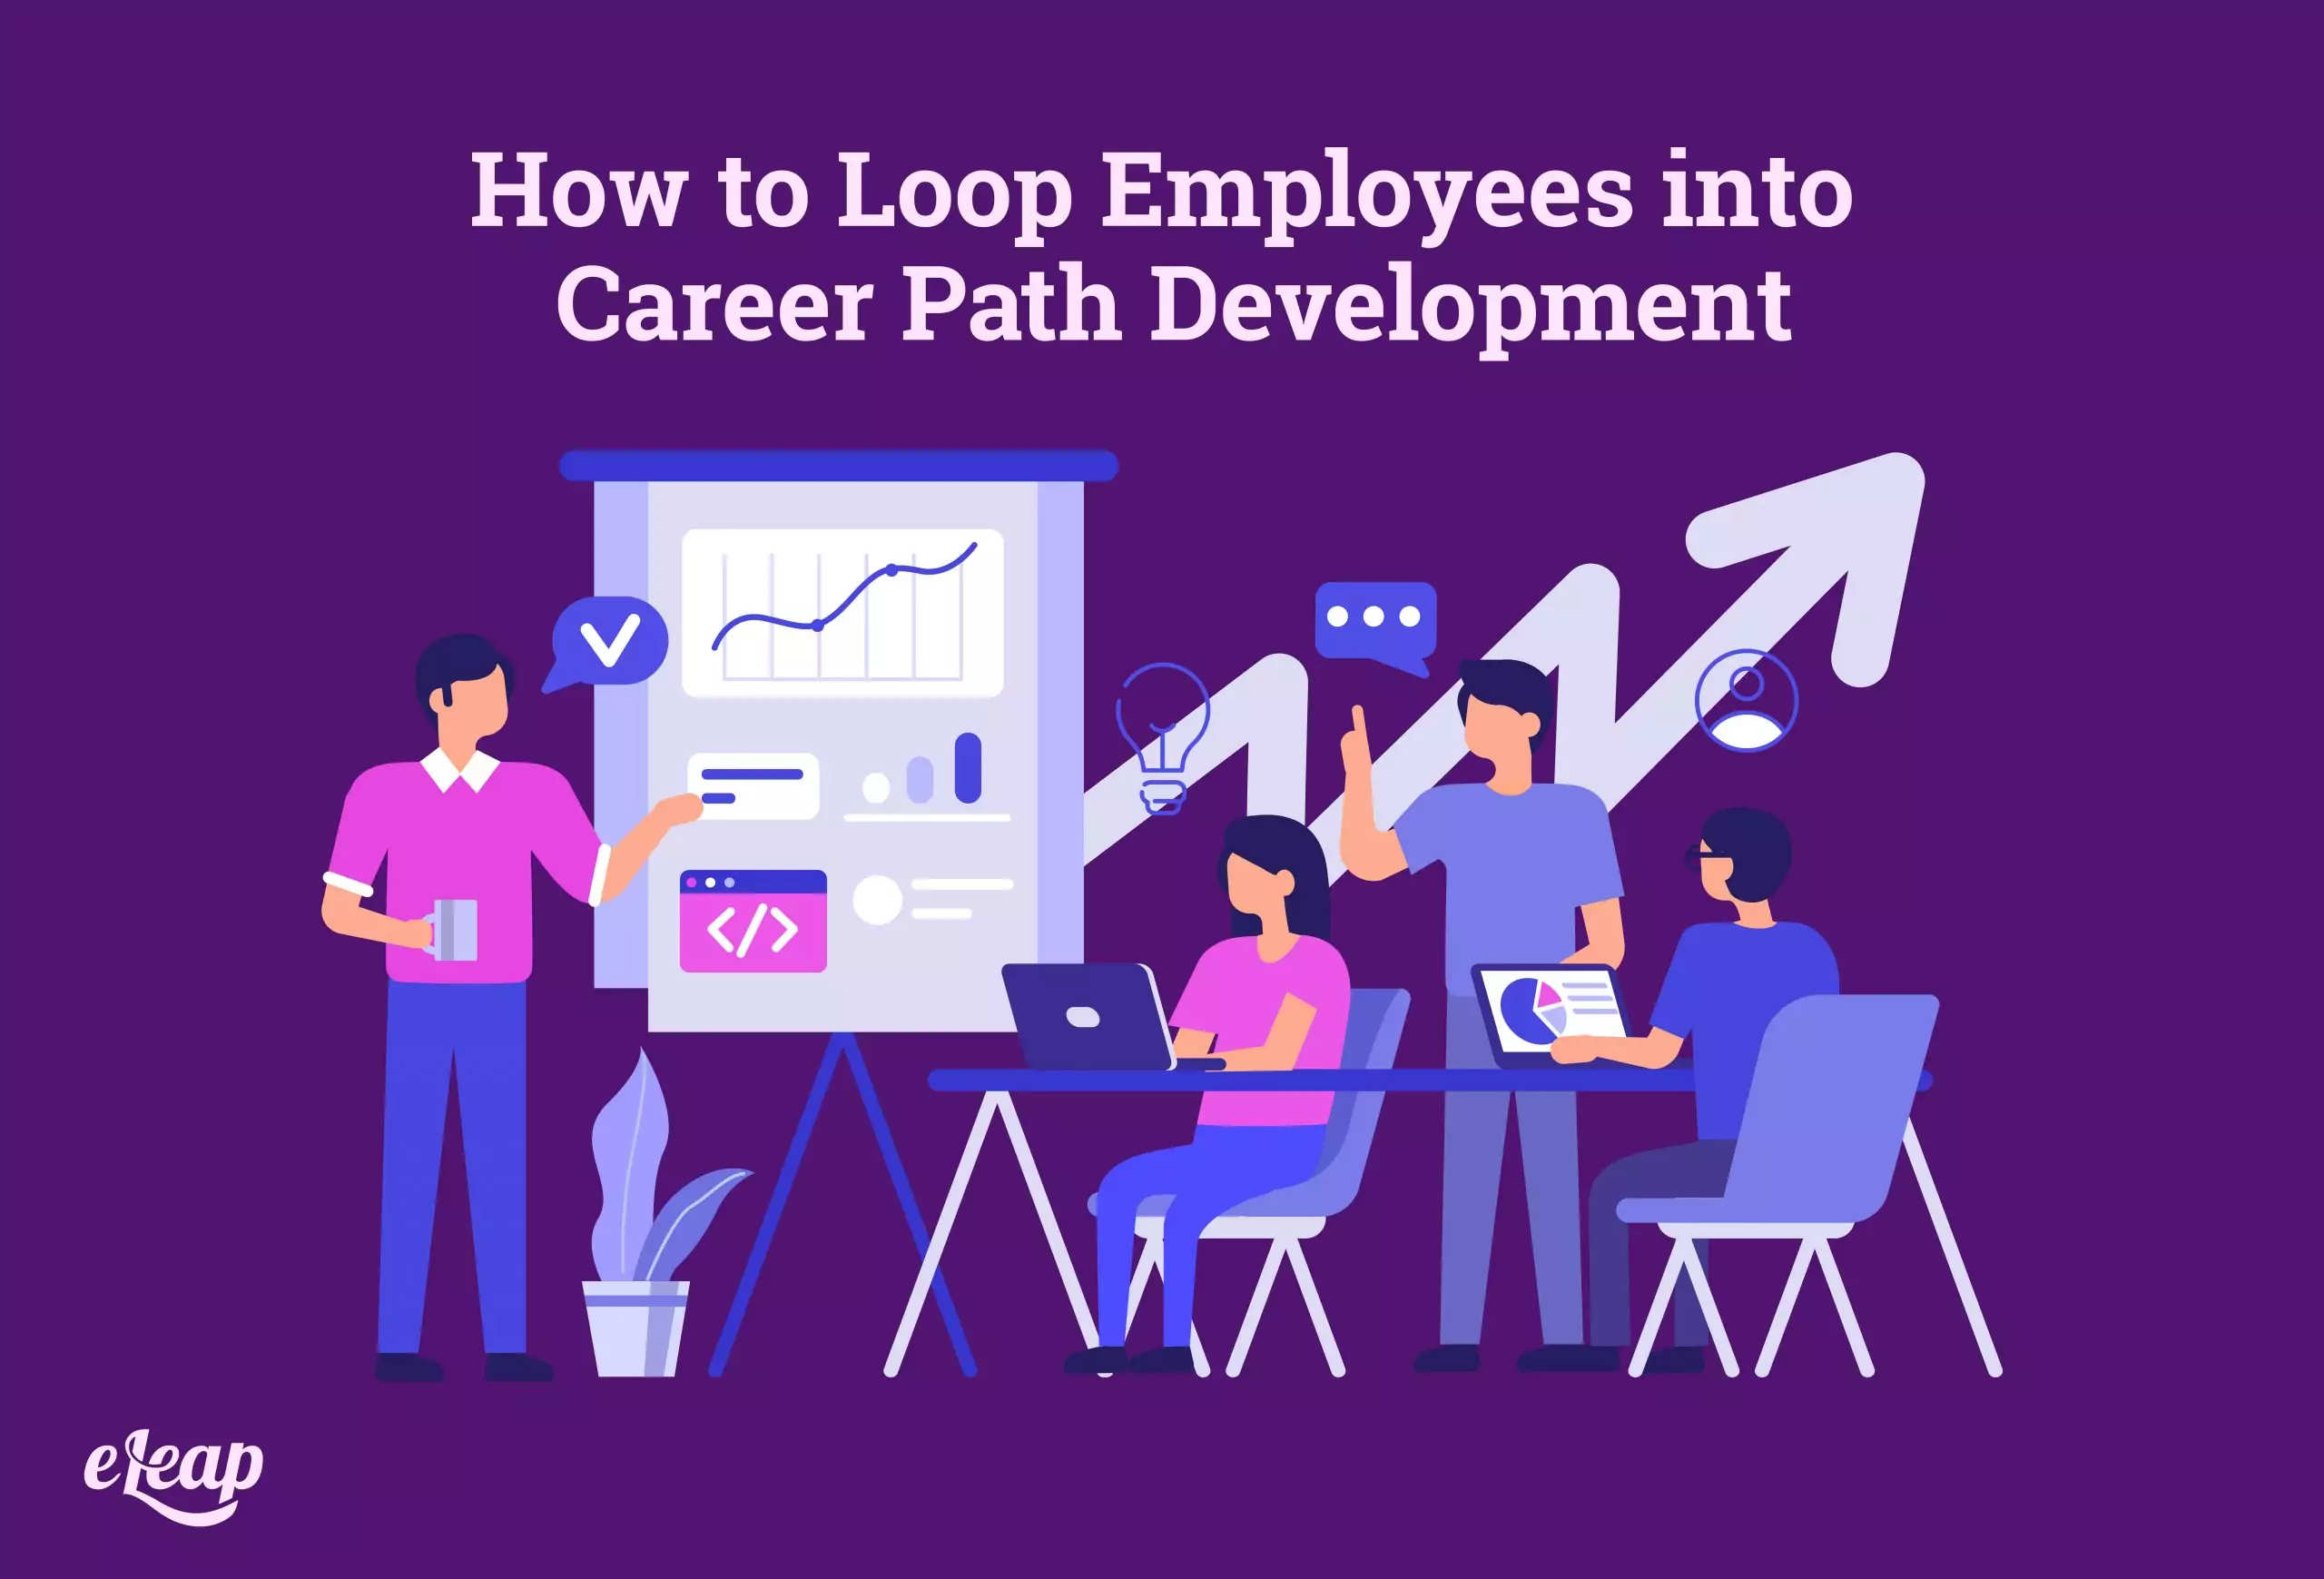 How to Loop Employees into Career Path Development